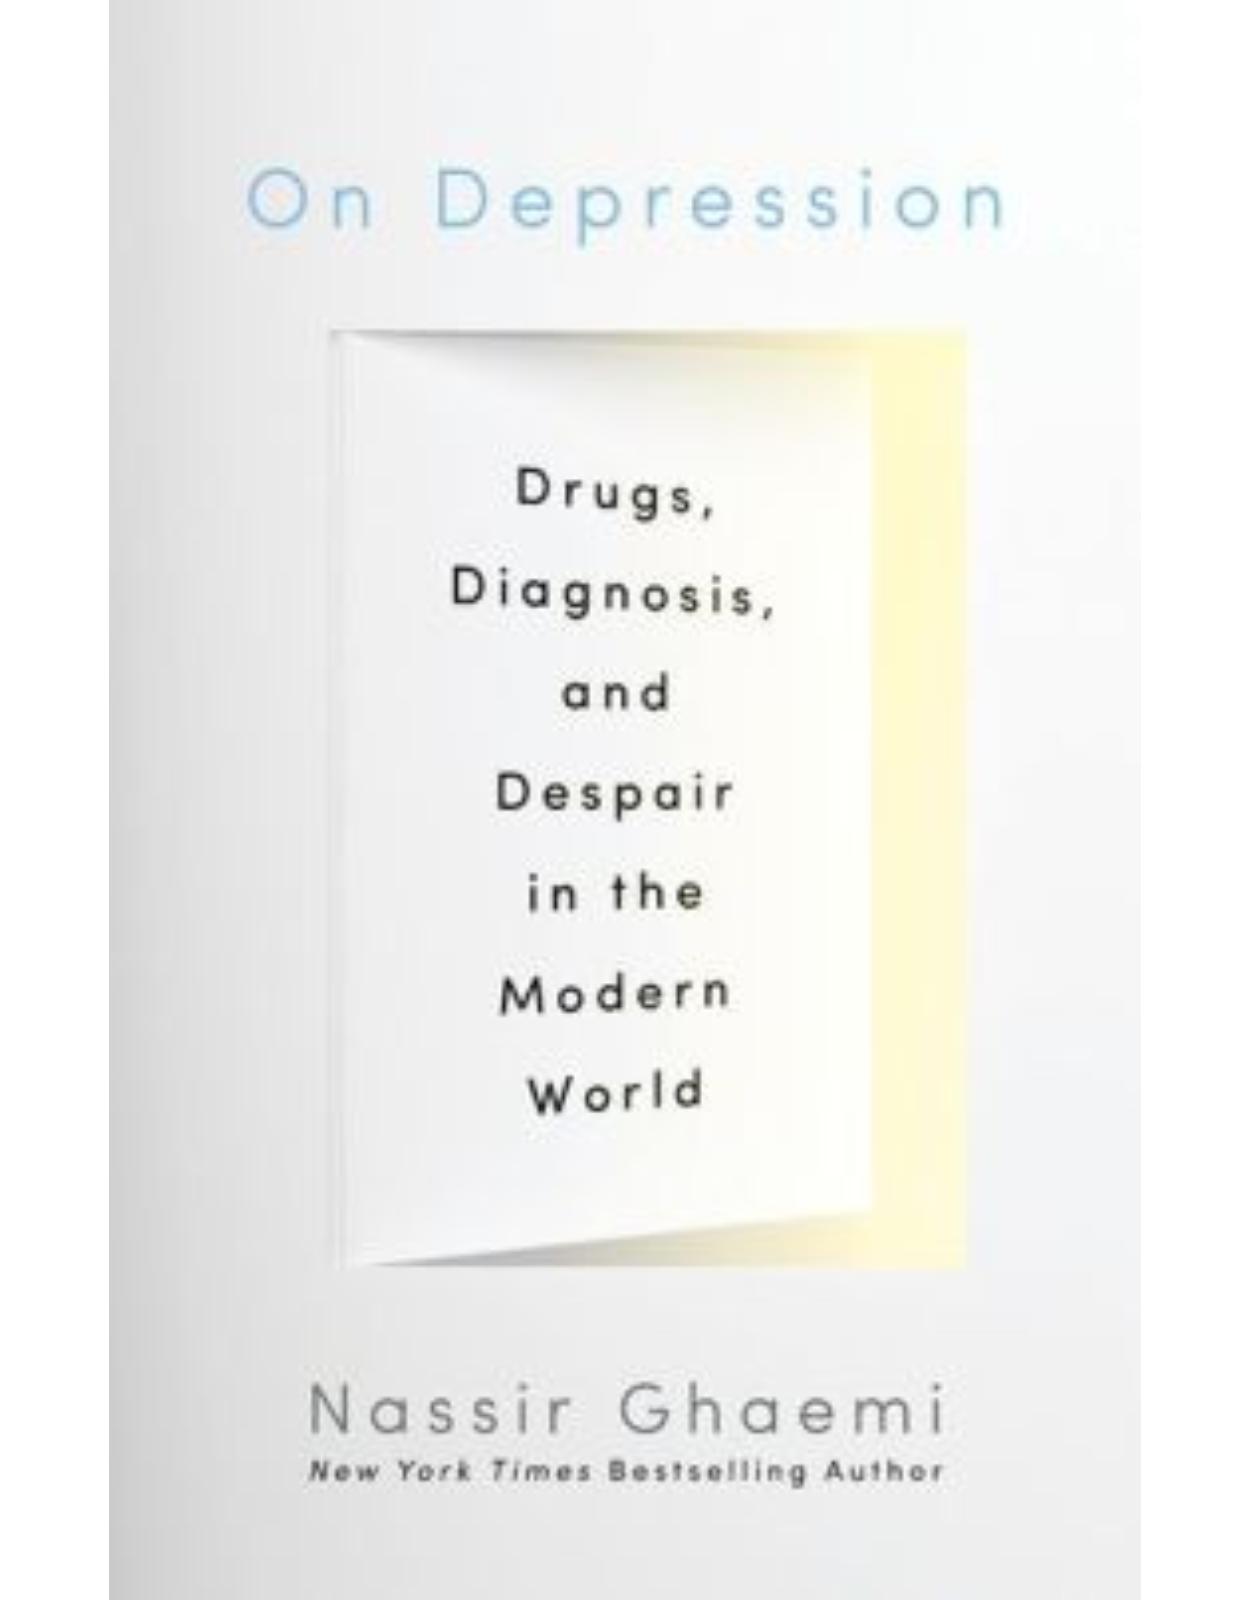 On Depression. Drugs, Diagnosis, and Despair in the Modern World